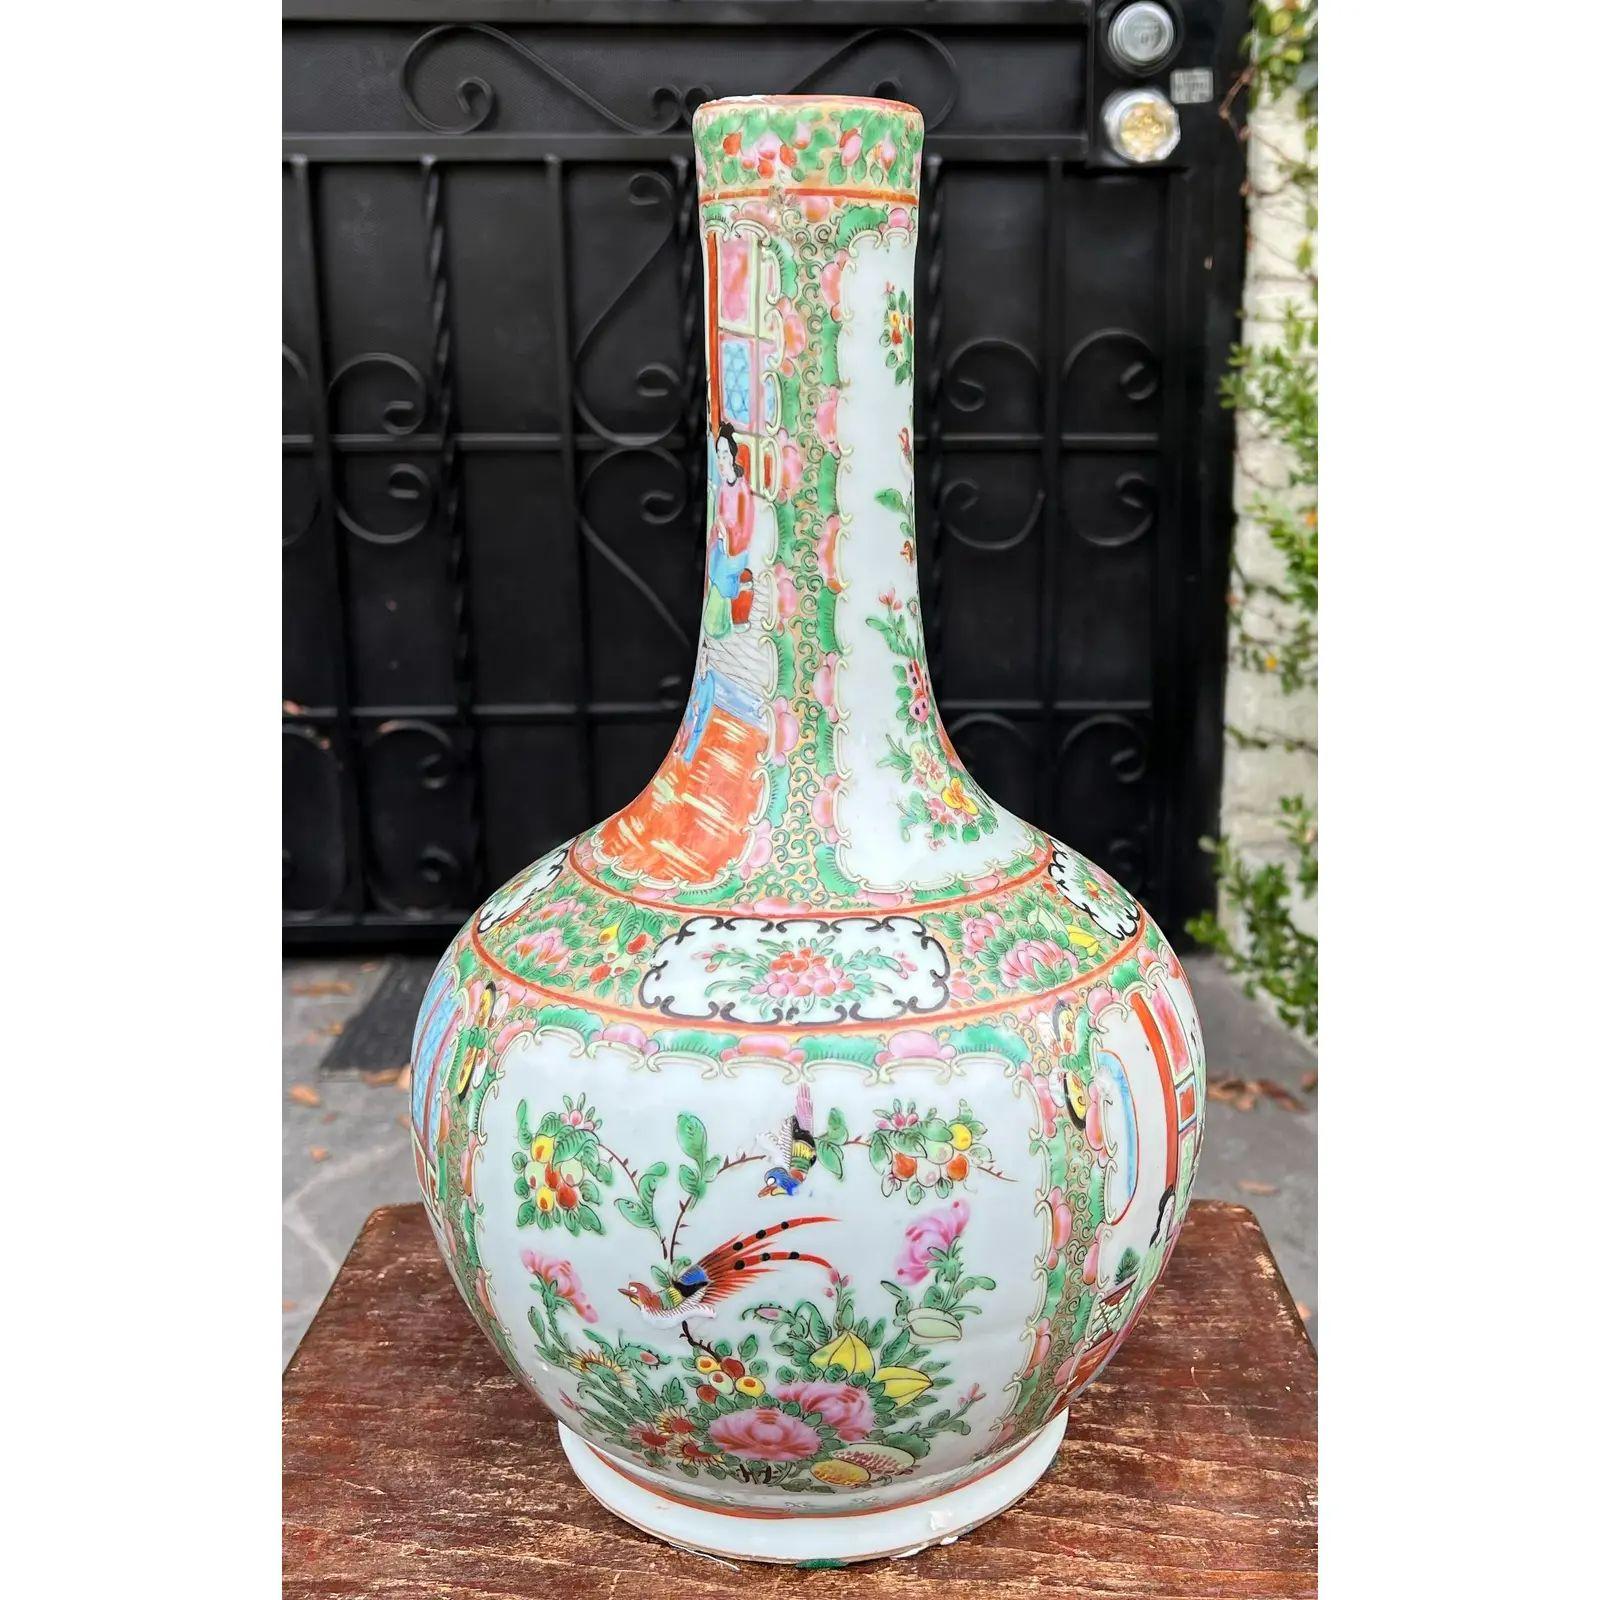 Antique Chinese Rose Medallion bottle vase. It is beautifully hand painted and features scenic medallions flanked by floral decoration.

Additional information: 
Materials: Ceramic
Color: Ivory
Period: early 19th century
Styles: Chinese
Item